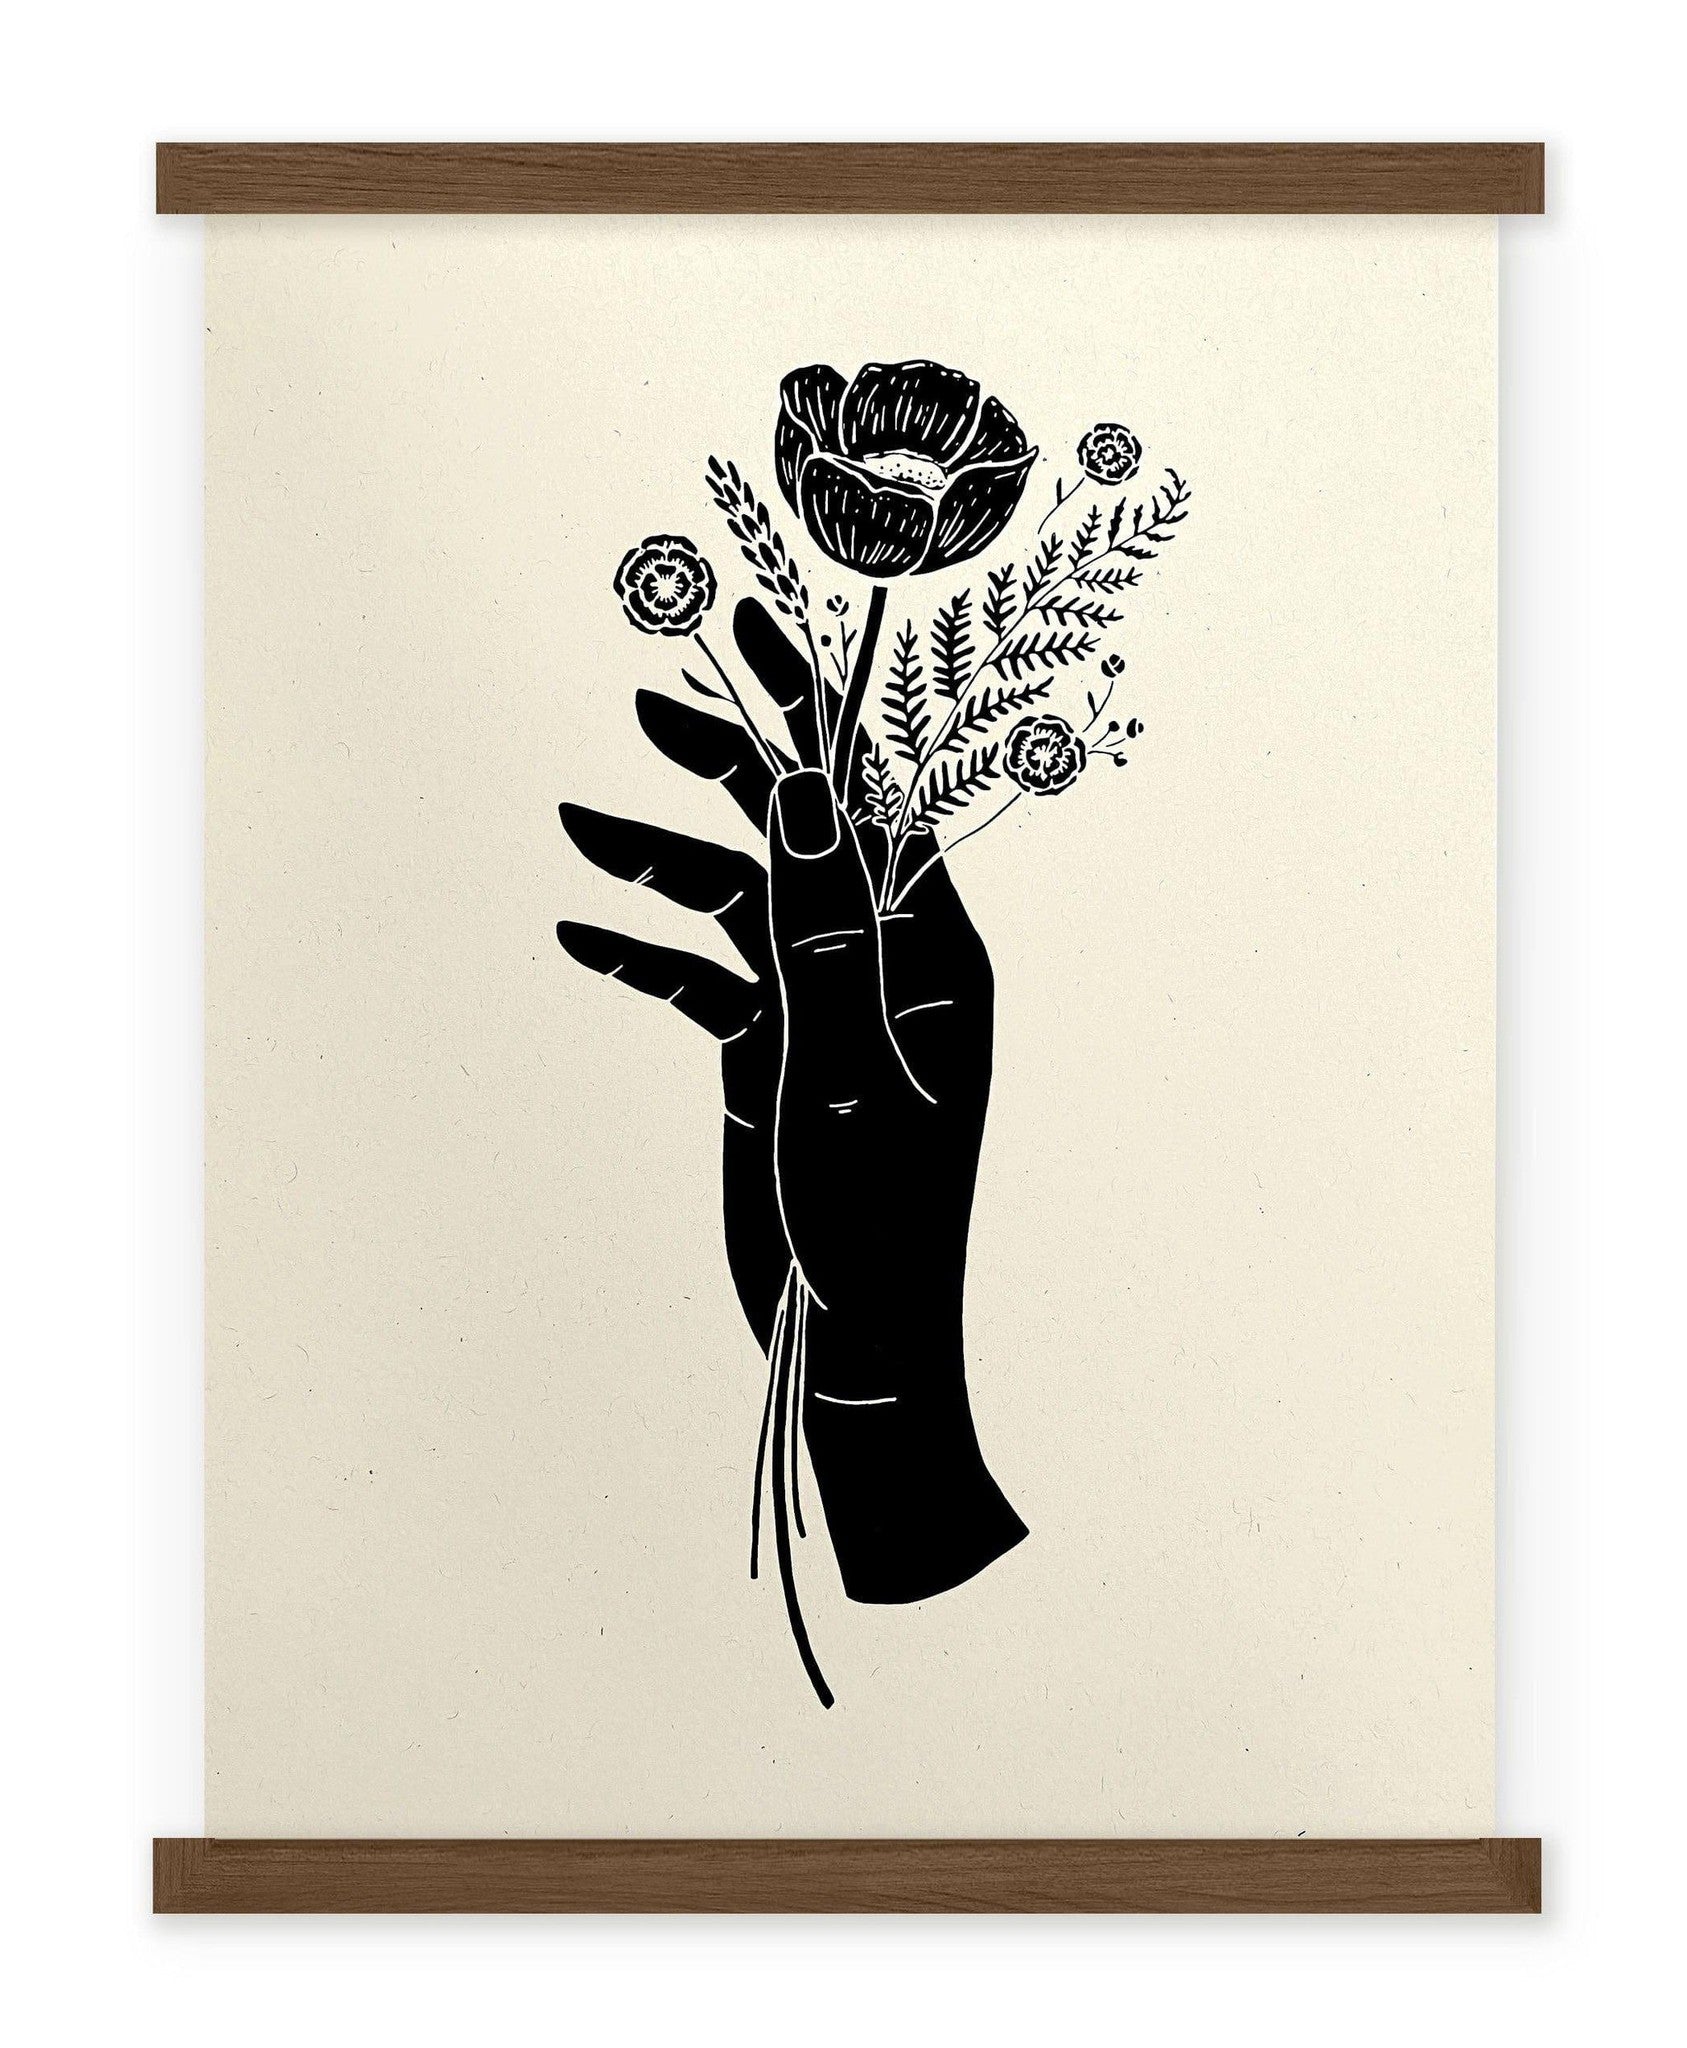 A black and white drawing of a Botanical Hand Print by The Wild Wander holding a flower.